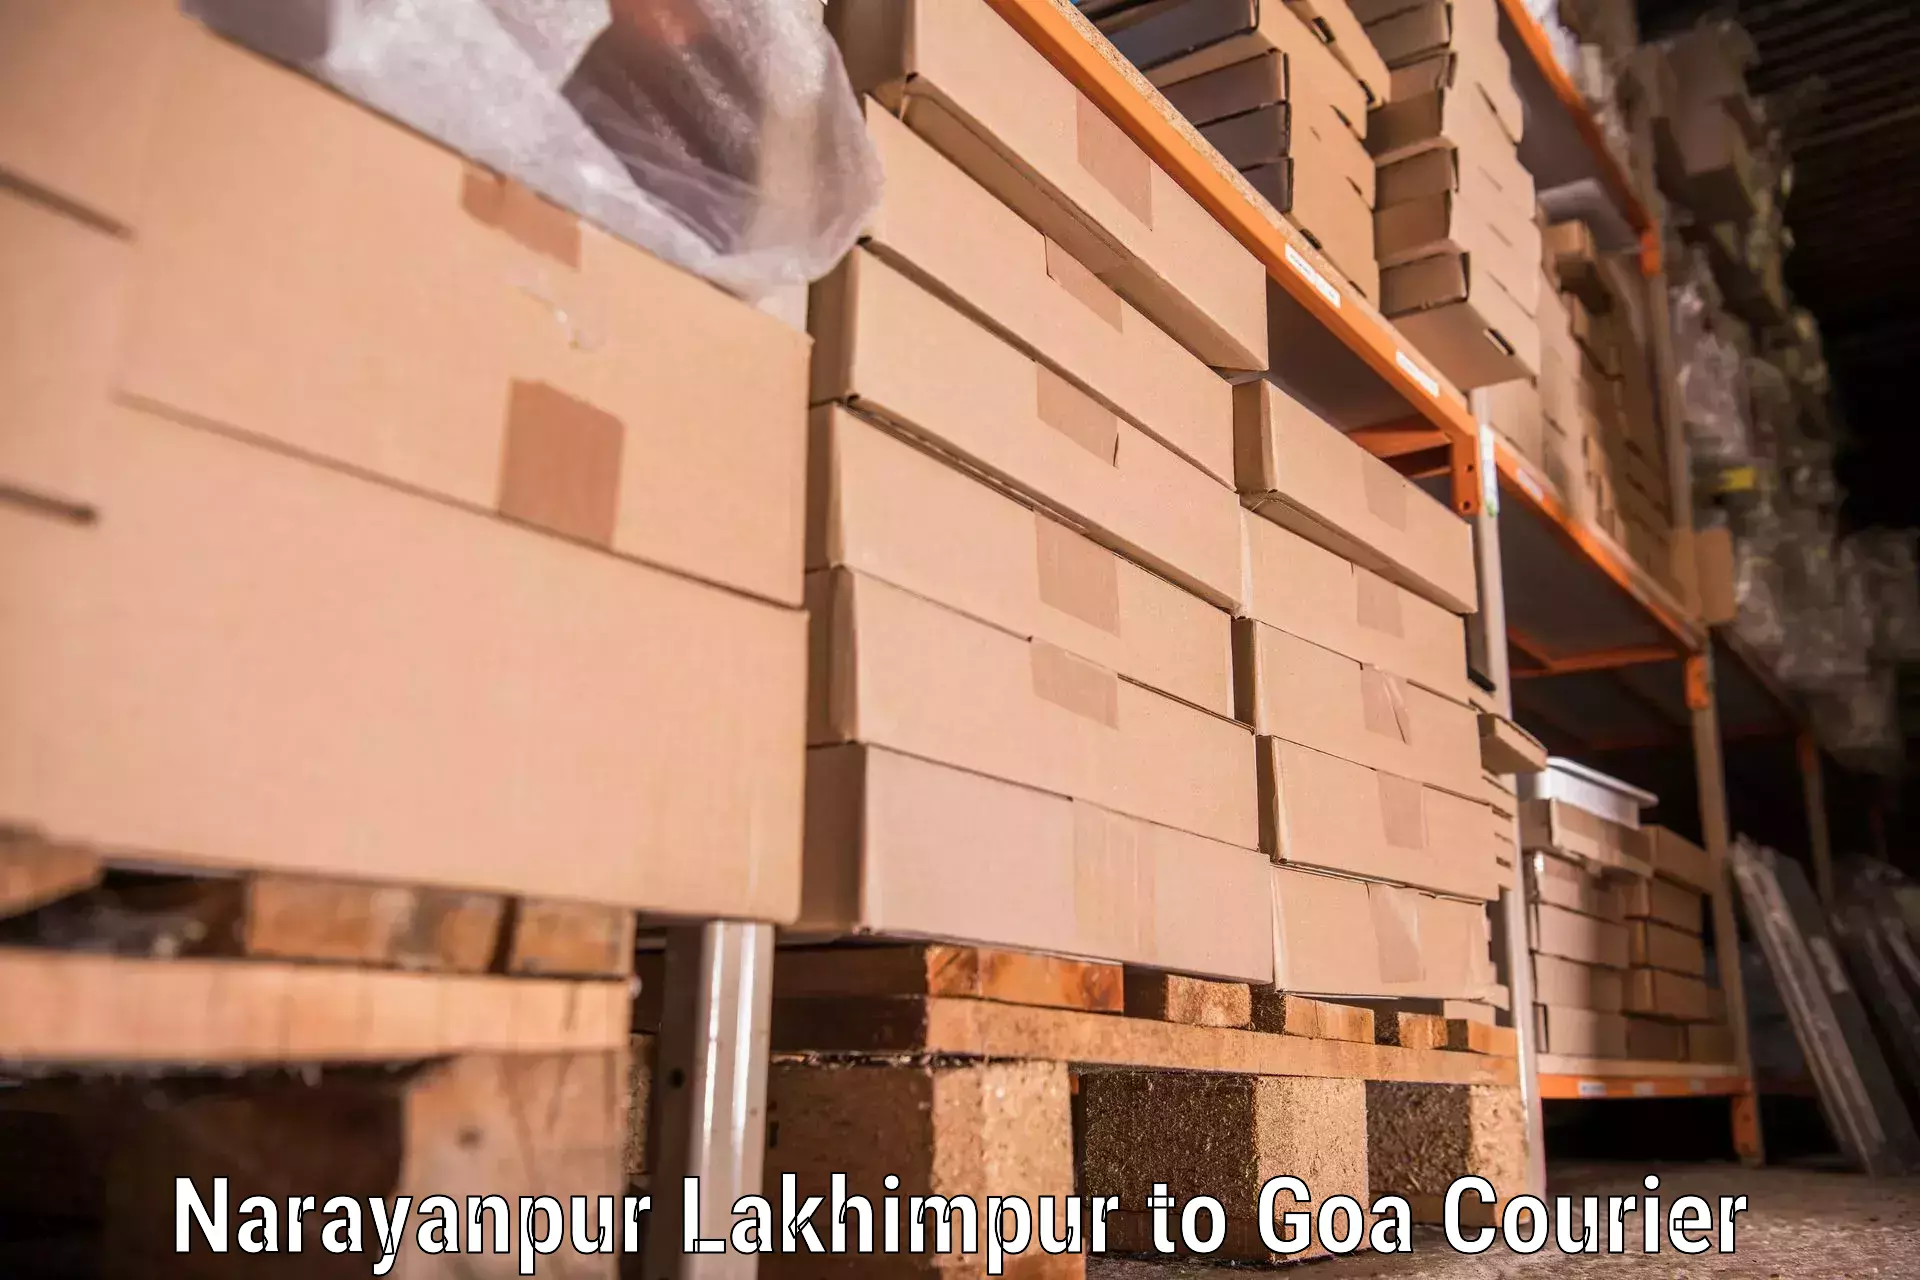 Professional movers and packers Narayanpur Lakhimpur to Bicholim